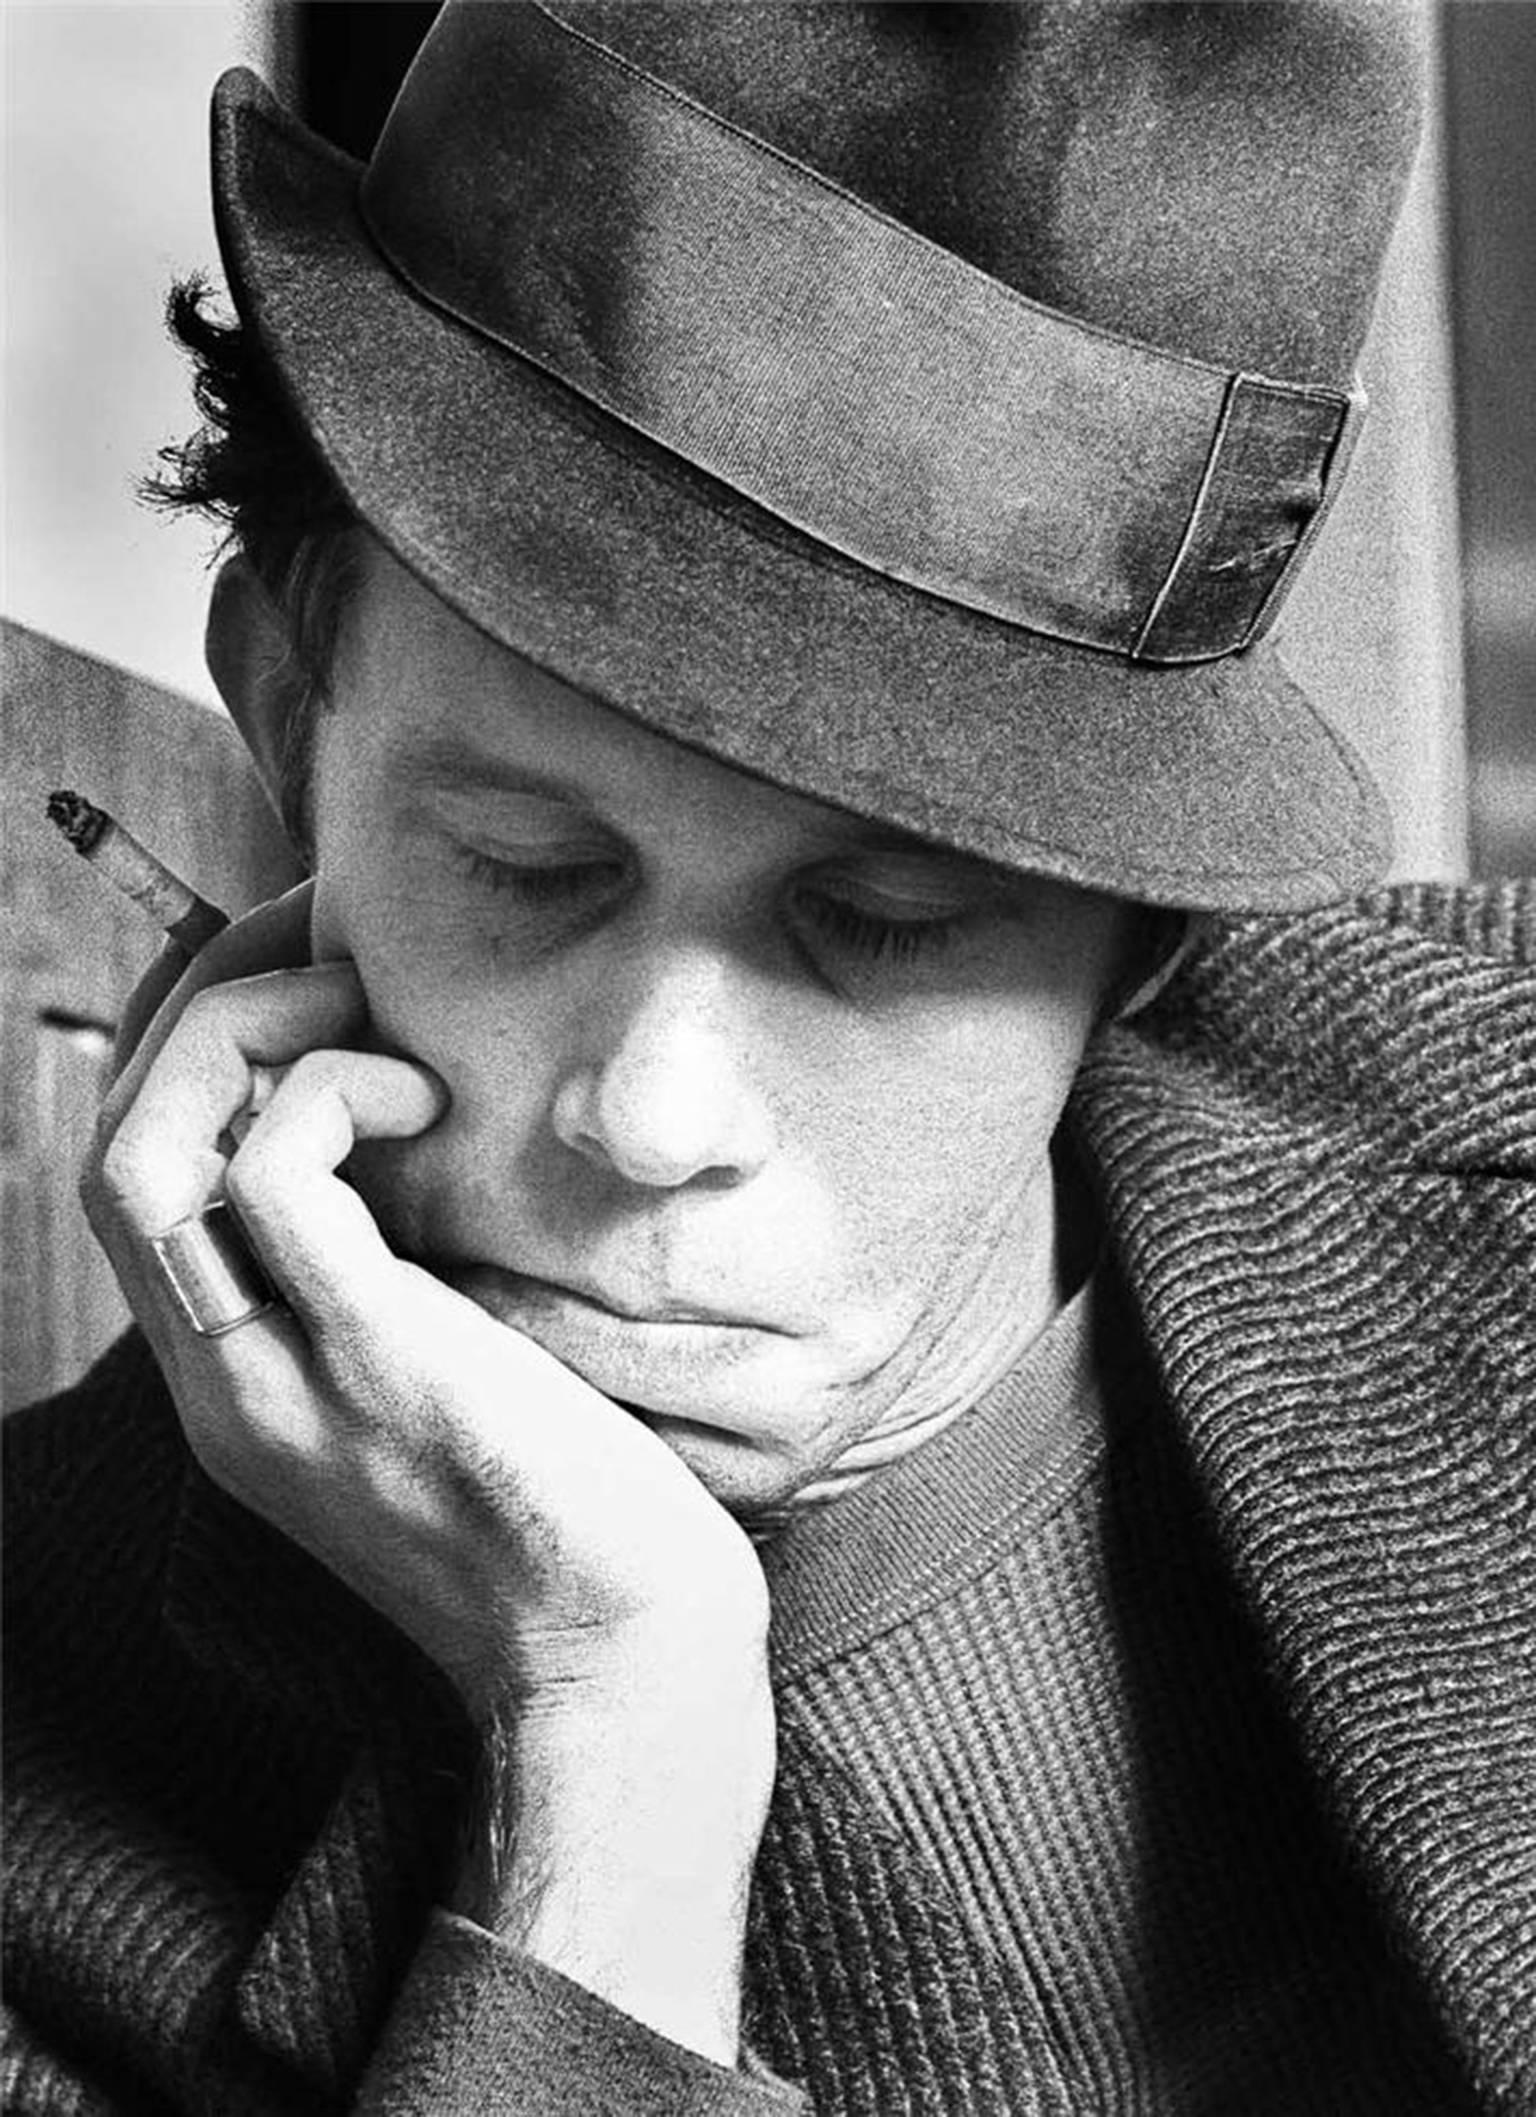 Colm Henry Black and White Photograph – Tom Waits, 1983